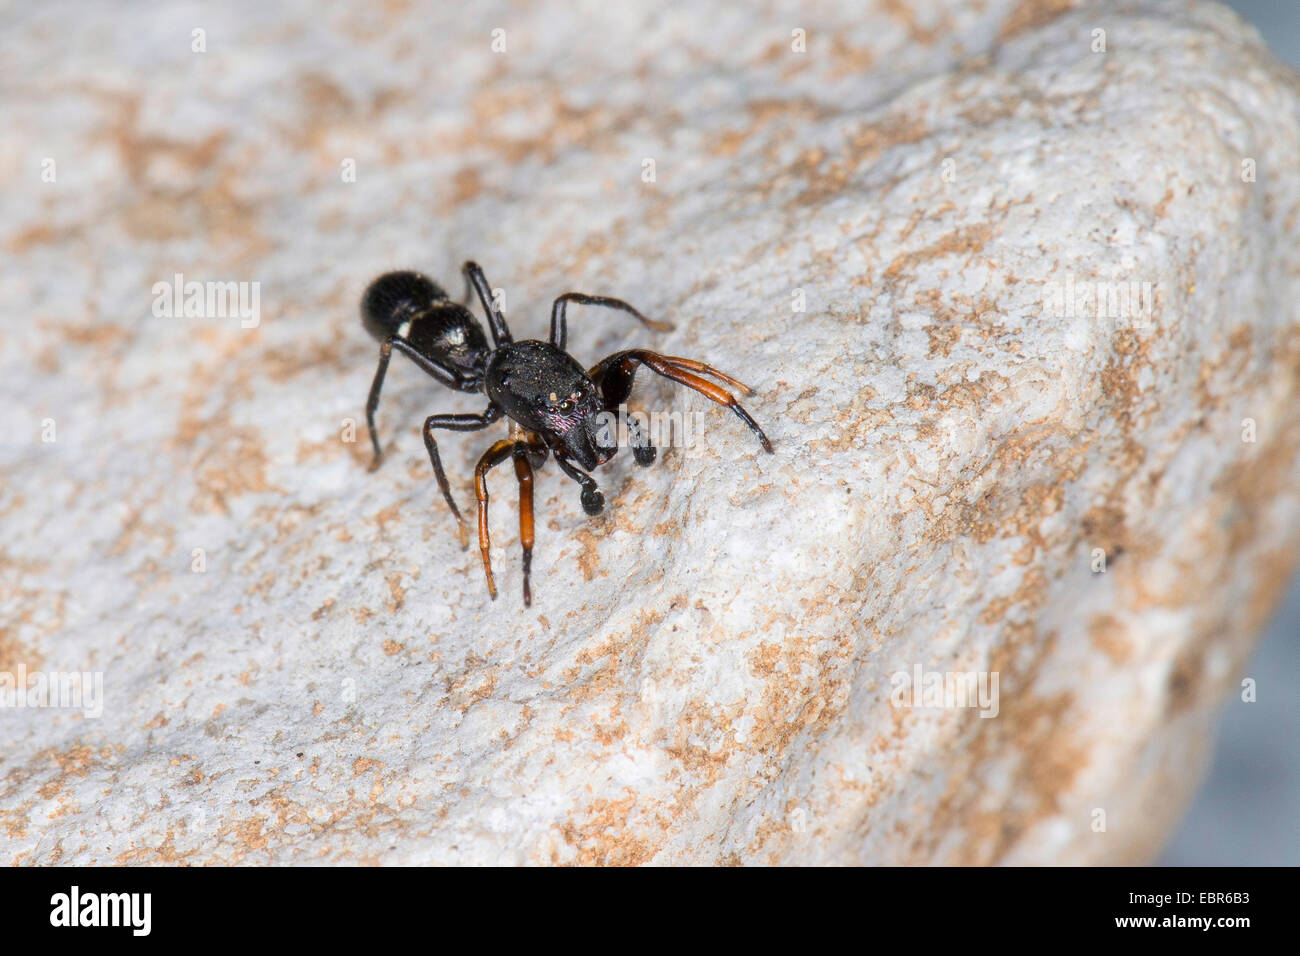 Jumping spider (Leptorchestes berolinensis), on a stone, Germany Stock Photo